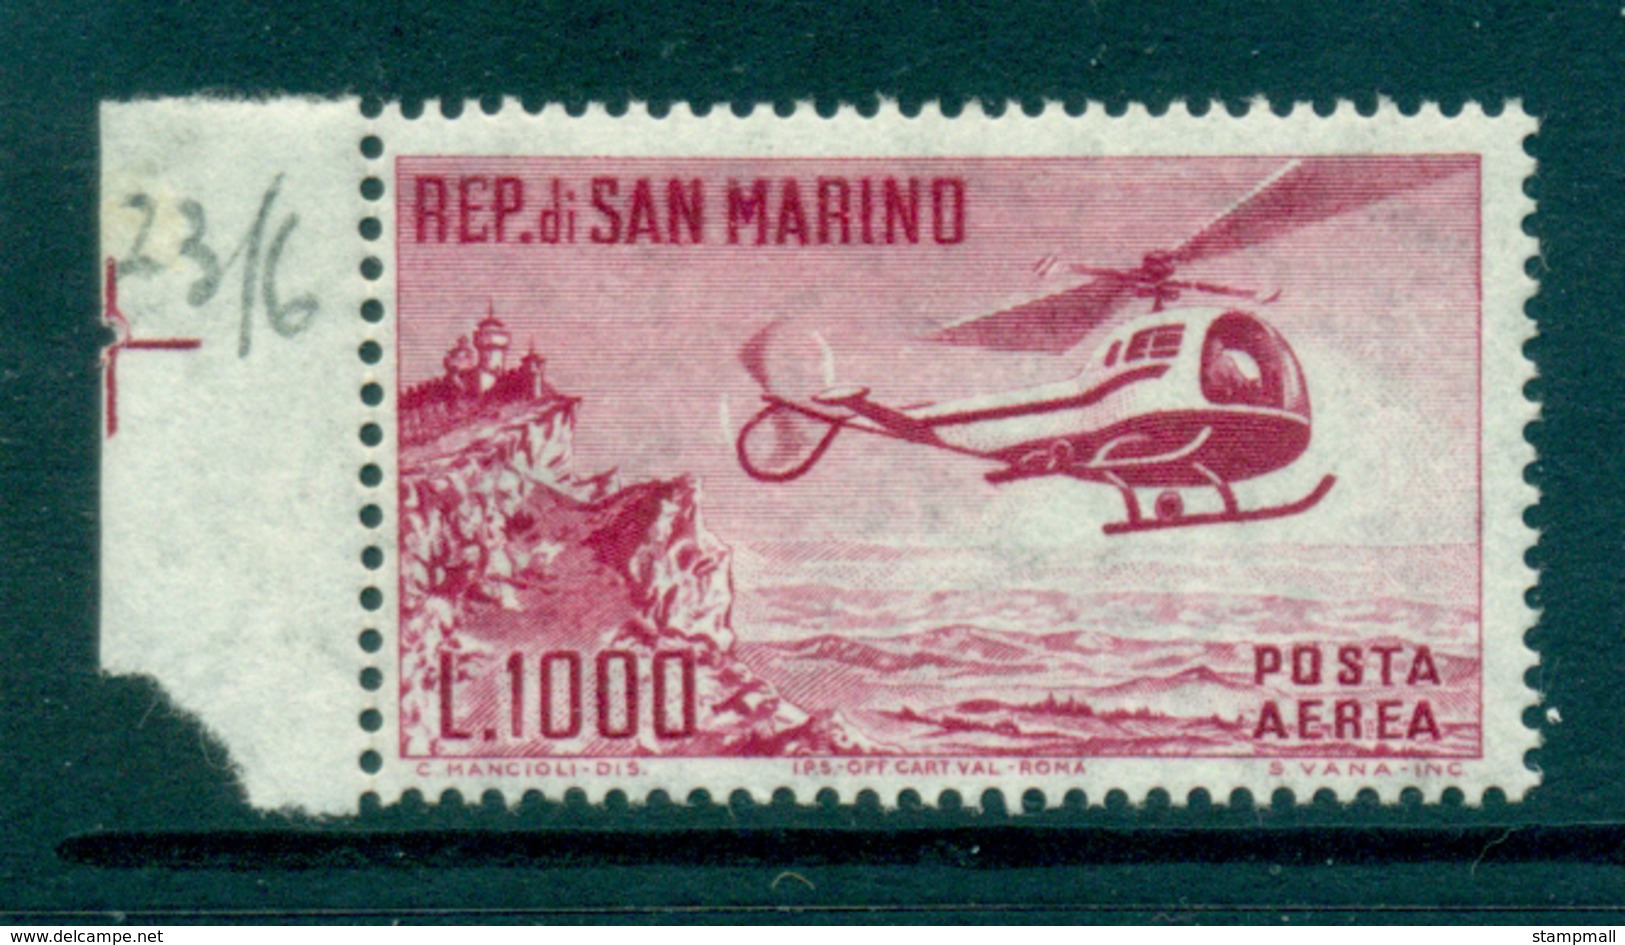 San Marino 1961 Helicopter & Mt Titano MLH Lot34837 - Unused Stamps